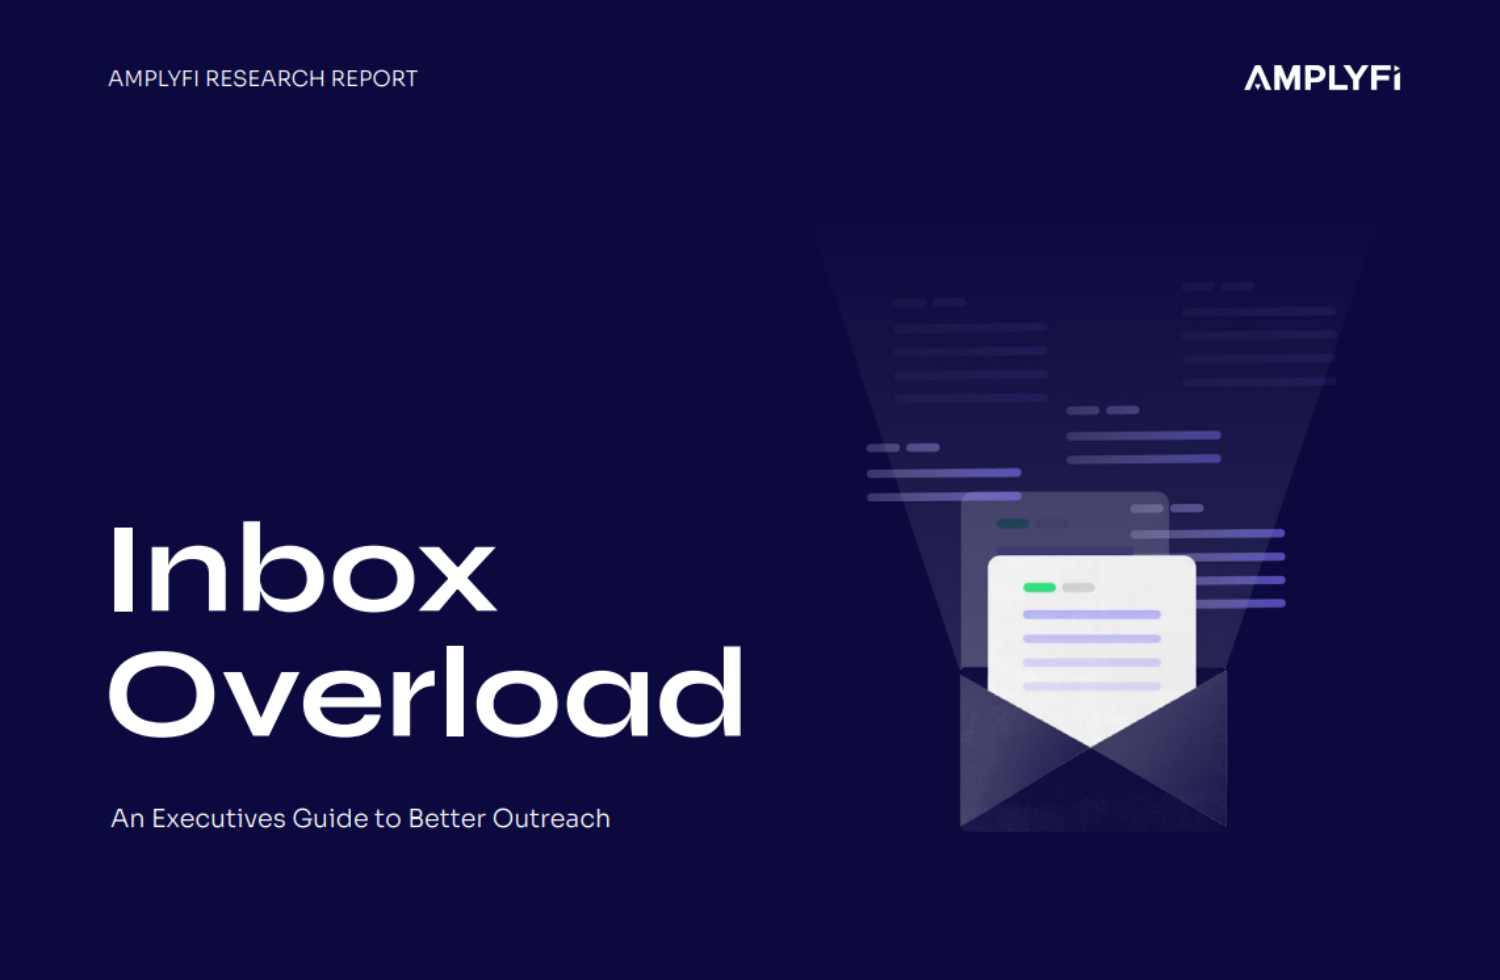 Inbox Overload front cover